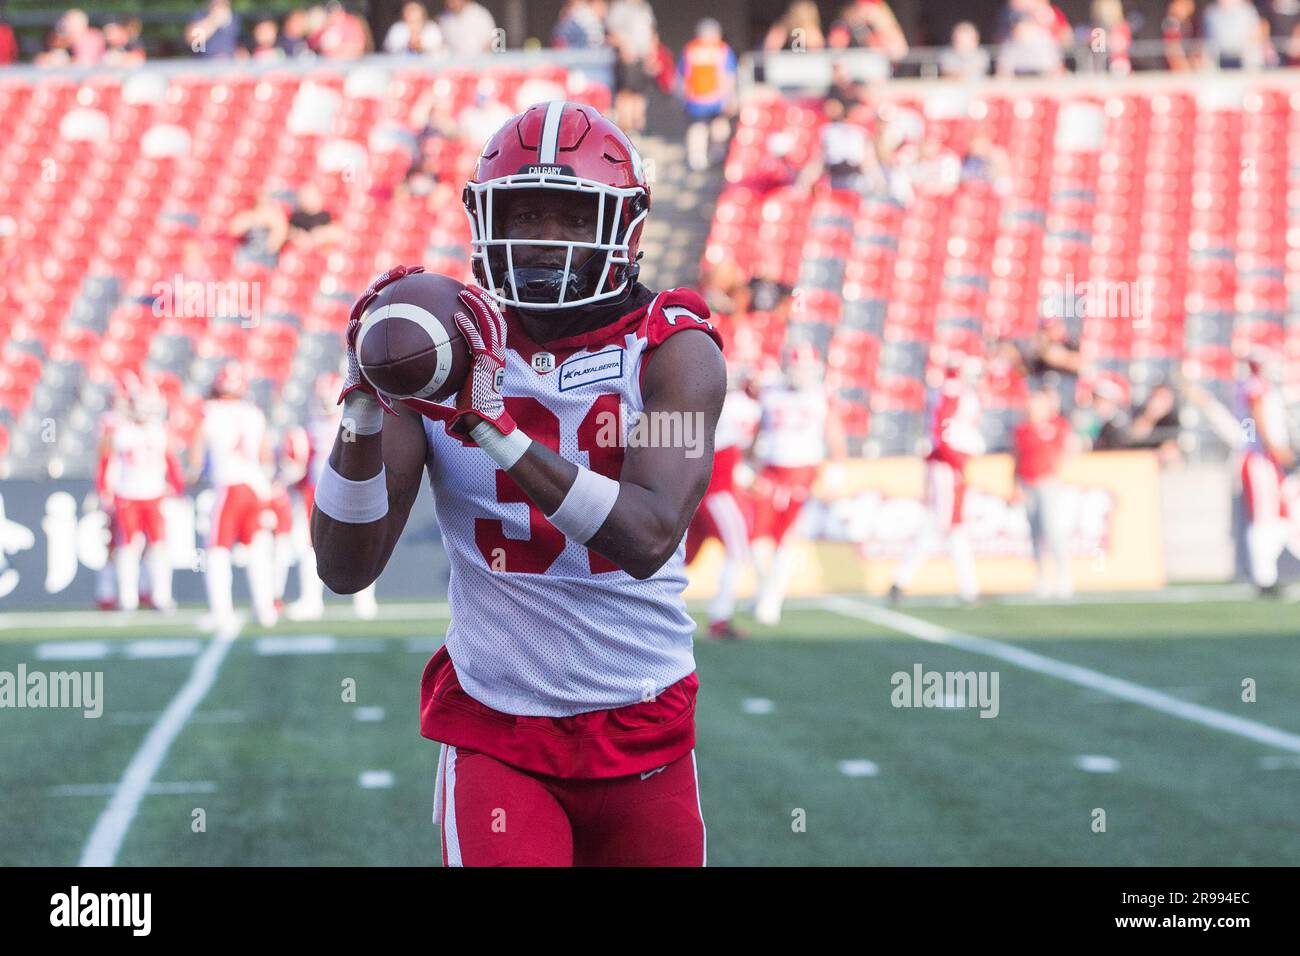 Ottawa, Canada. 15th June, 2023. Calgary Stampeders defensive back Tre Roberson (31) warms up prior to the CFL game between Calgary Stampeders and Ottawa Redblacks held at TD Place Stadium in Ottawa, Canada. Daniel Lea/CSM/Alamy Live News Stock Photo